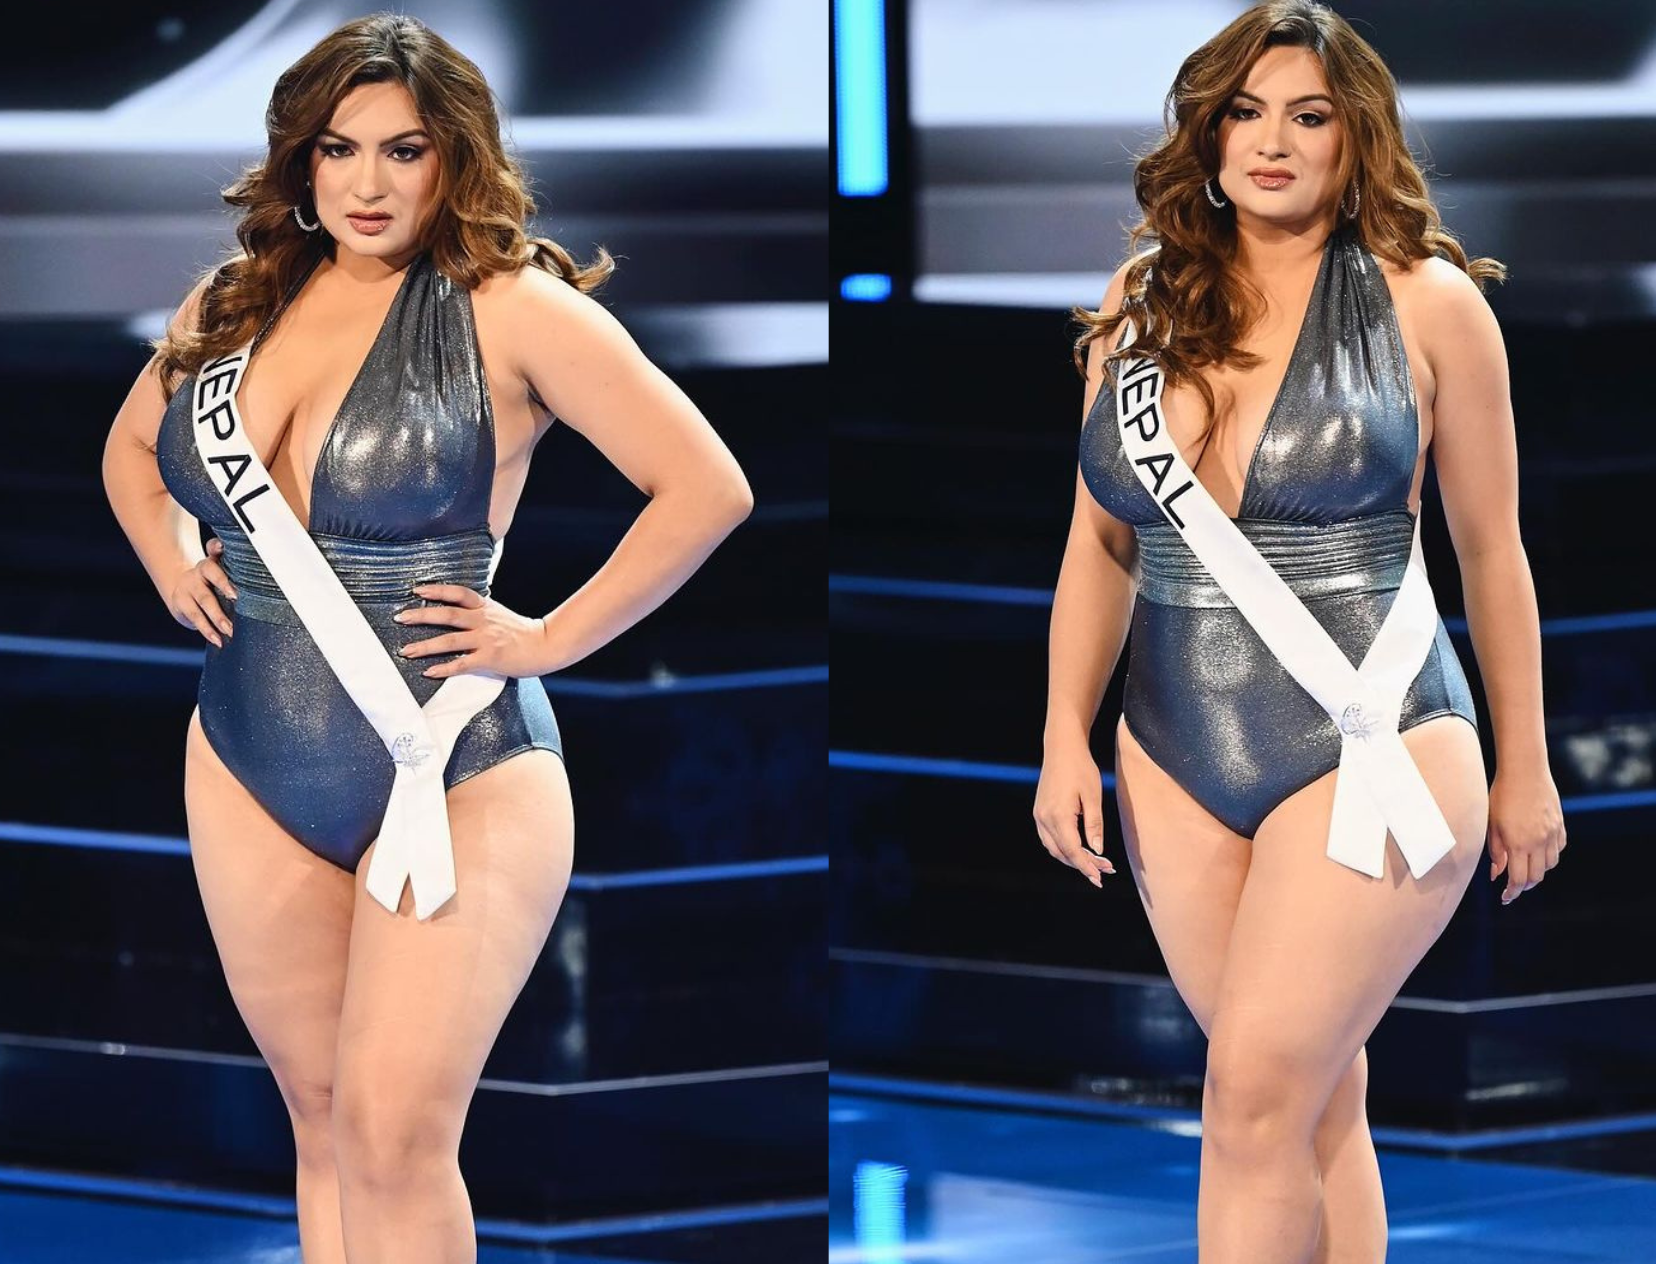 Plus-size' Miss Universe contestant in top spot responds to body